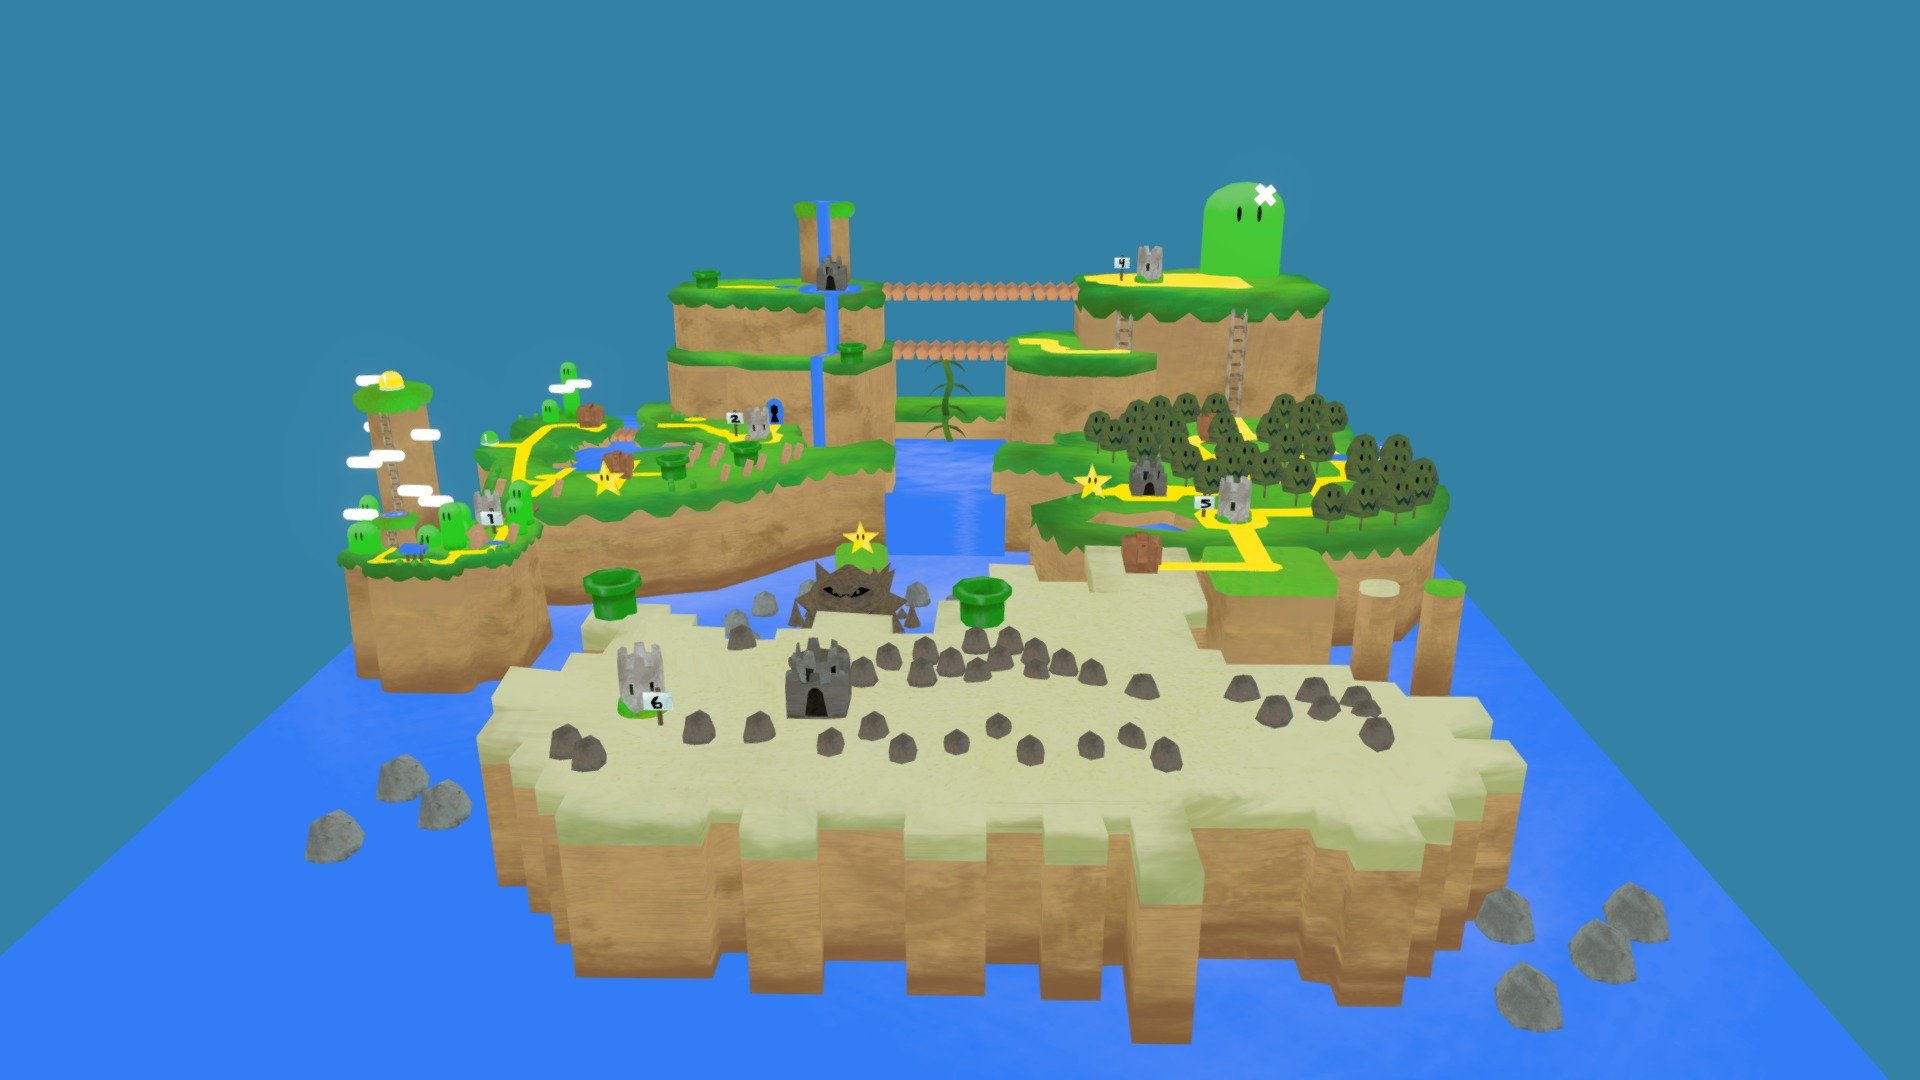 [https://www.artstation.com/ryan_carlos] this iconic super mario world map, maded using 3ds max and substance painter - Super Mario World - Overworld - Buy Royalty Free 3D model by Ryan_Carlos (@BUZZFOREVER) 3d model